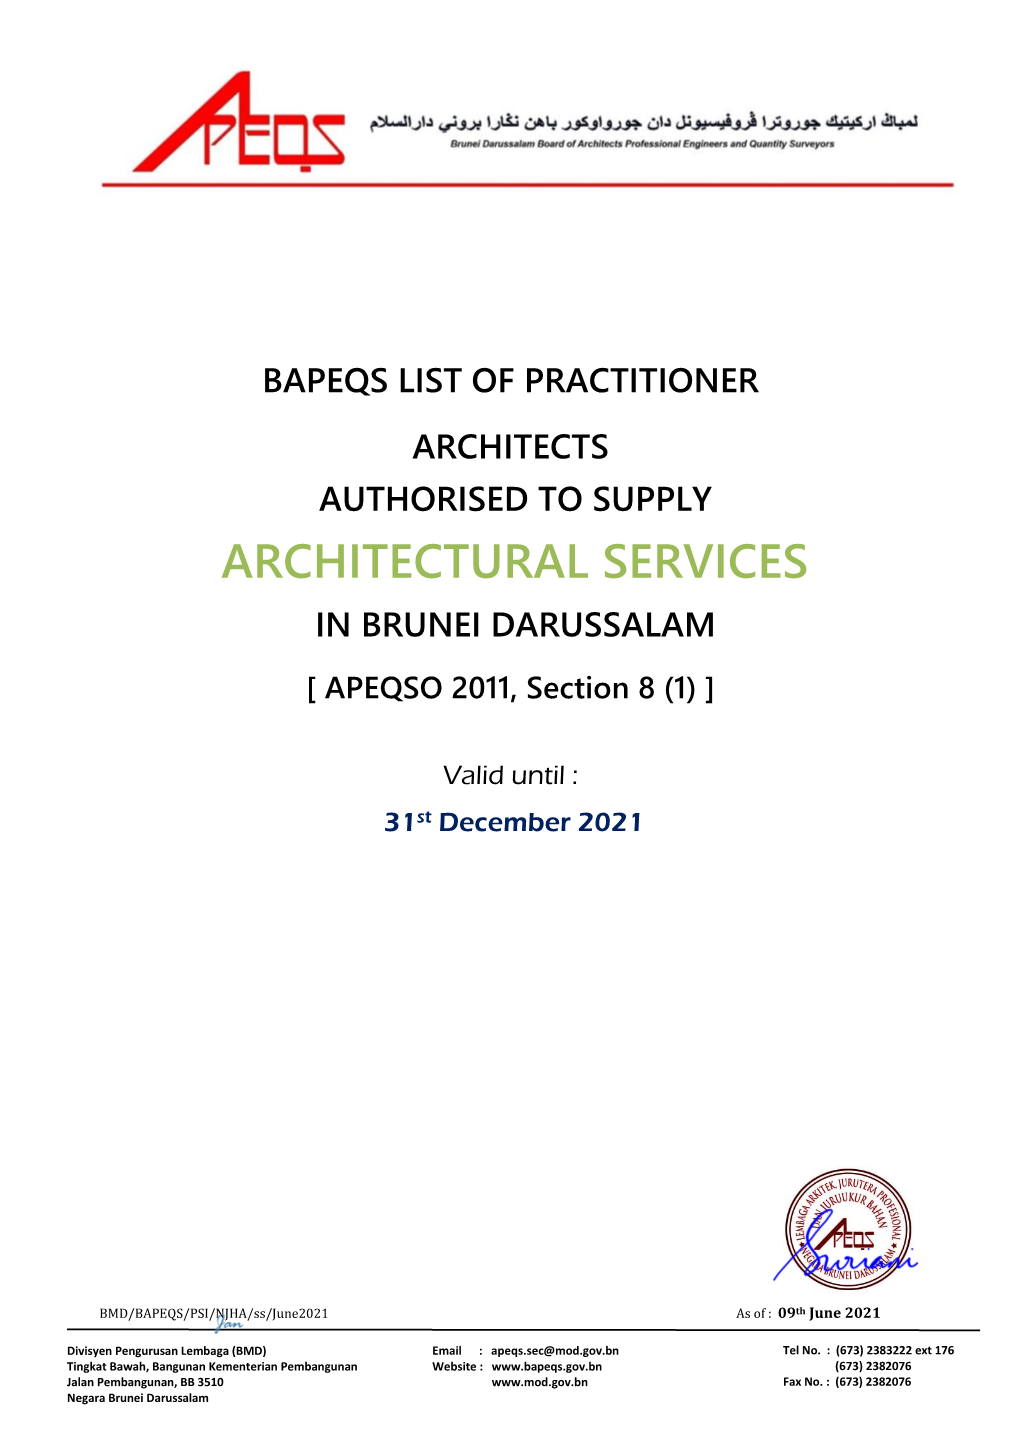 Practitioner Architects Authorised to Supply Architectural Services in Brunei Darussalam